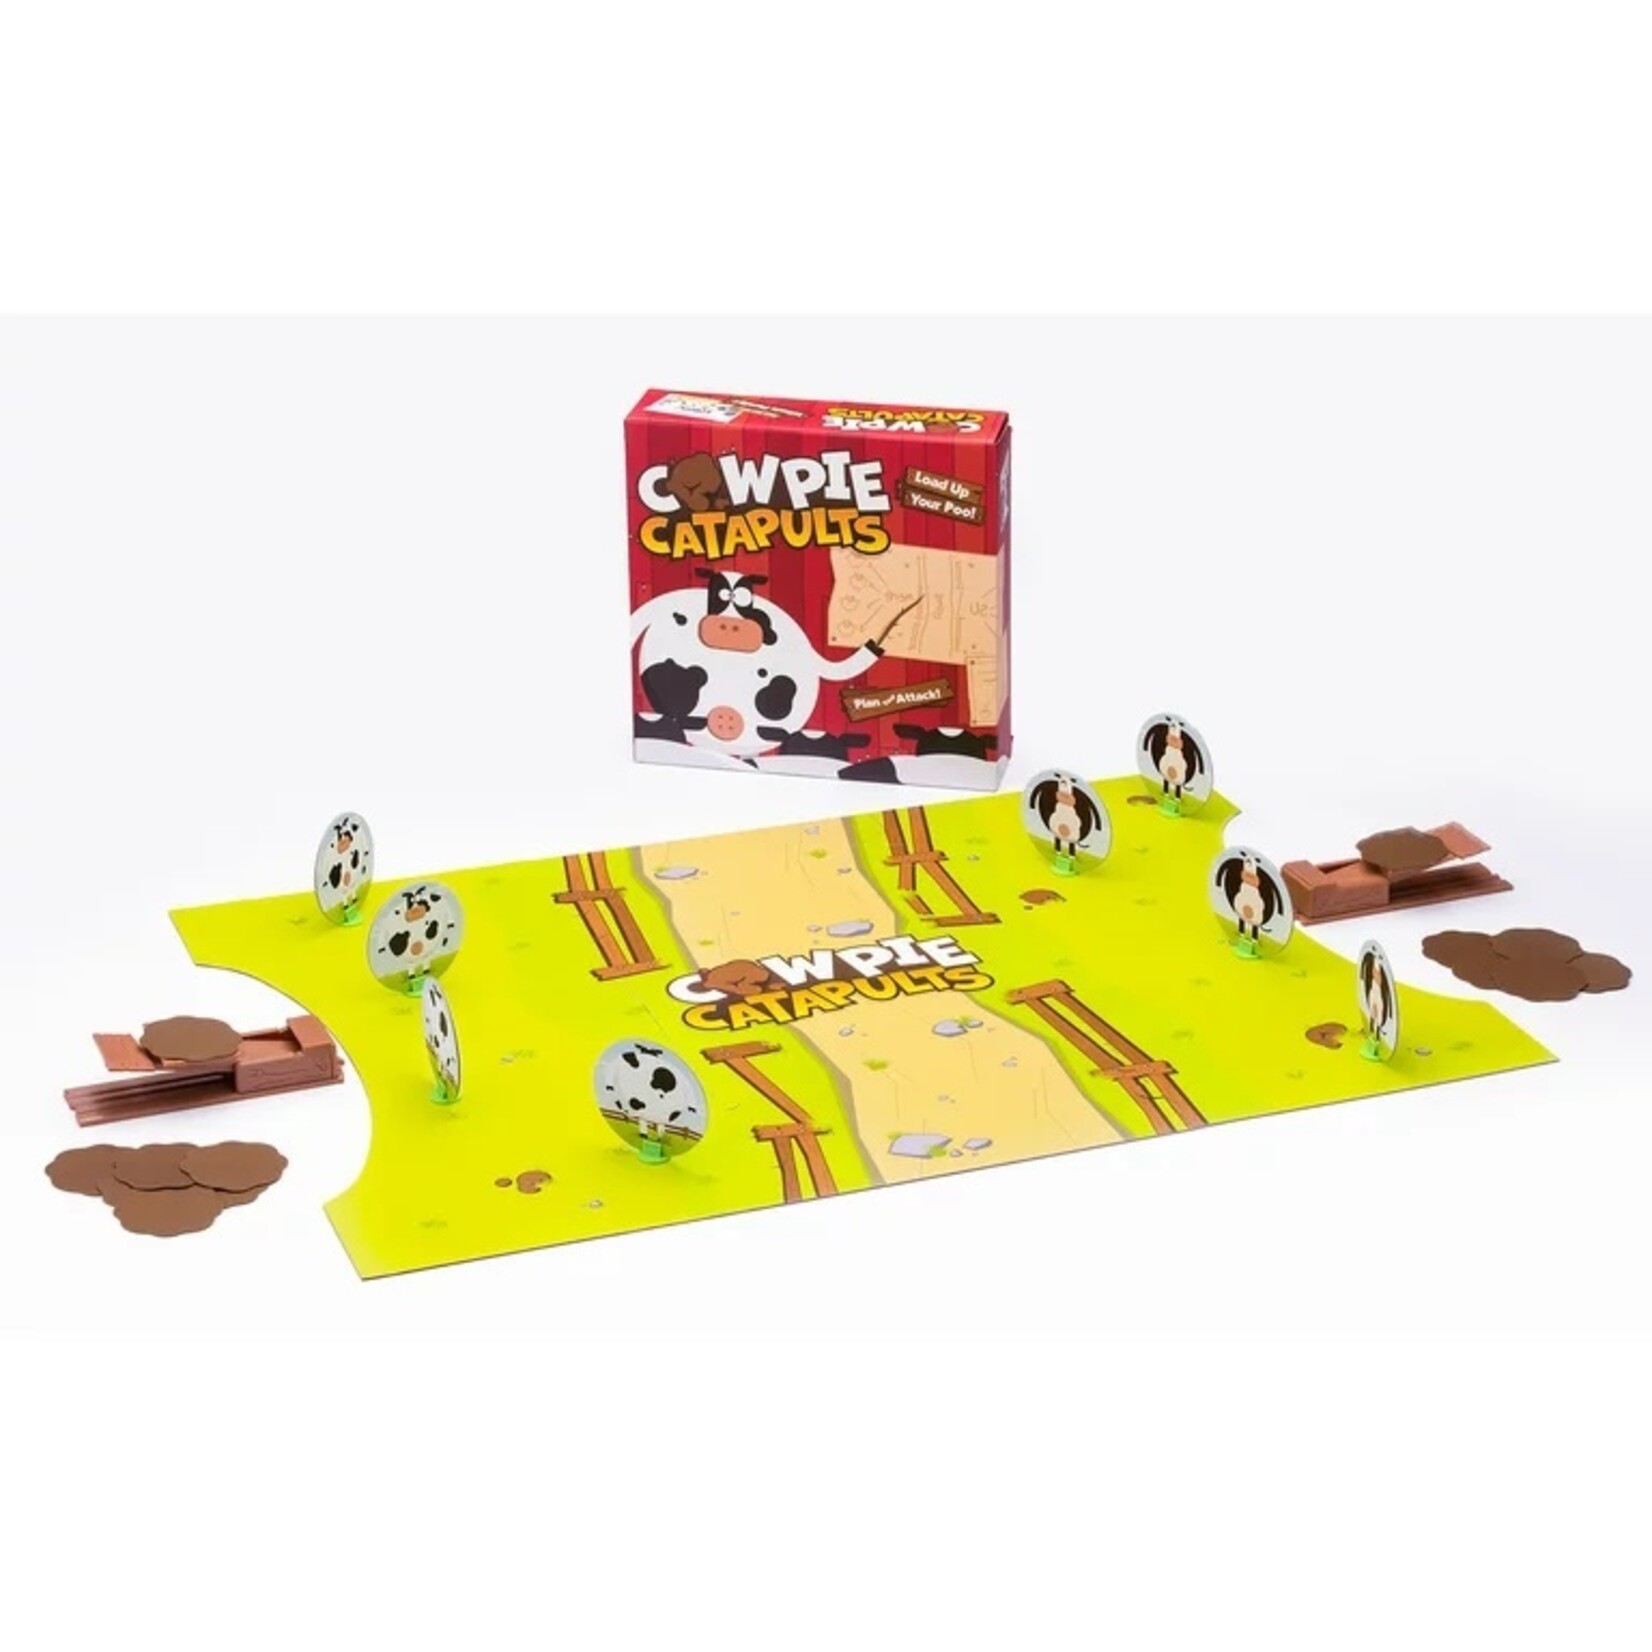 Play All Day Cowpie Catapults